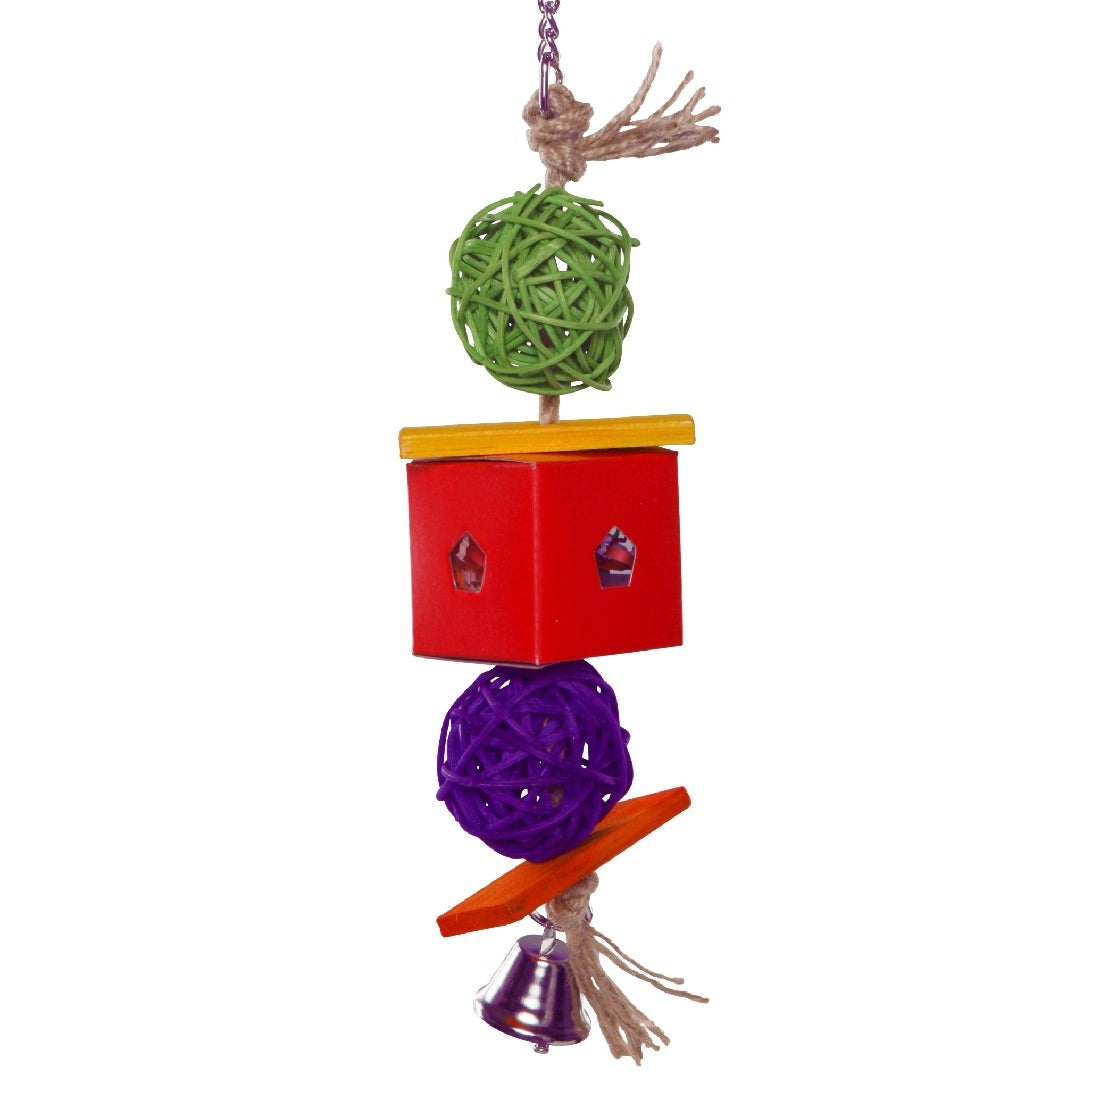 Colorful hanging bird toy with blocks, rattan balls, and bell.